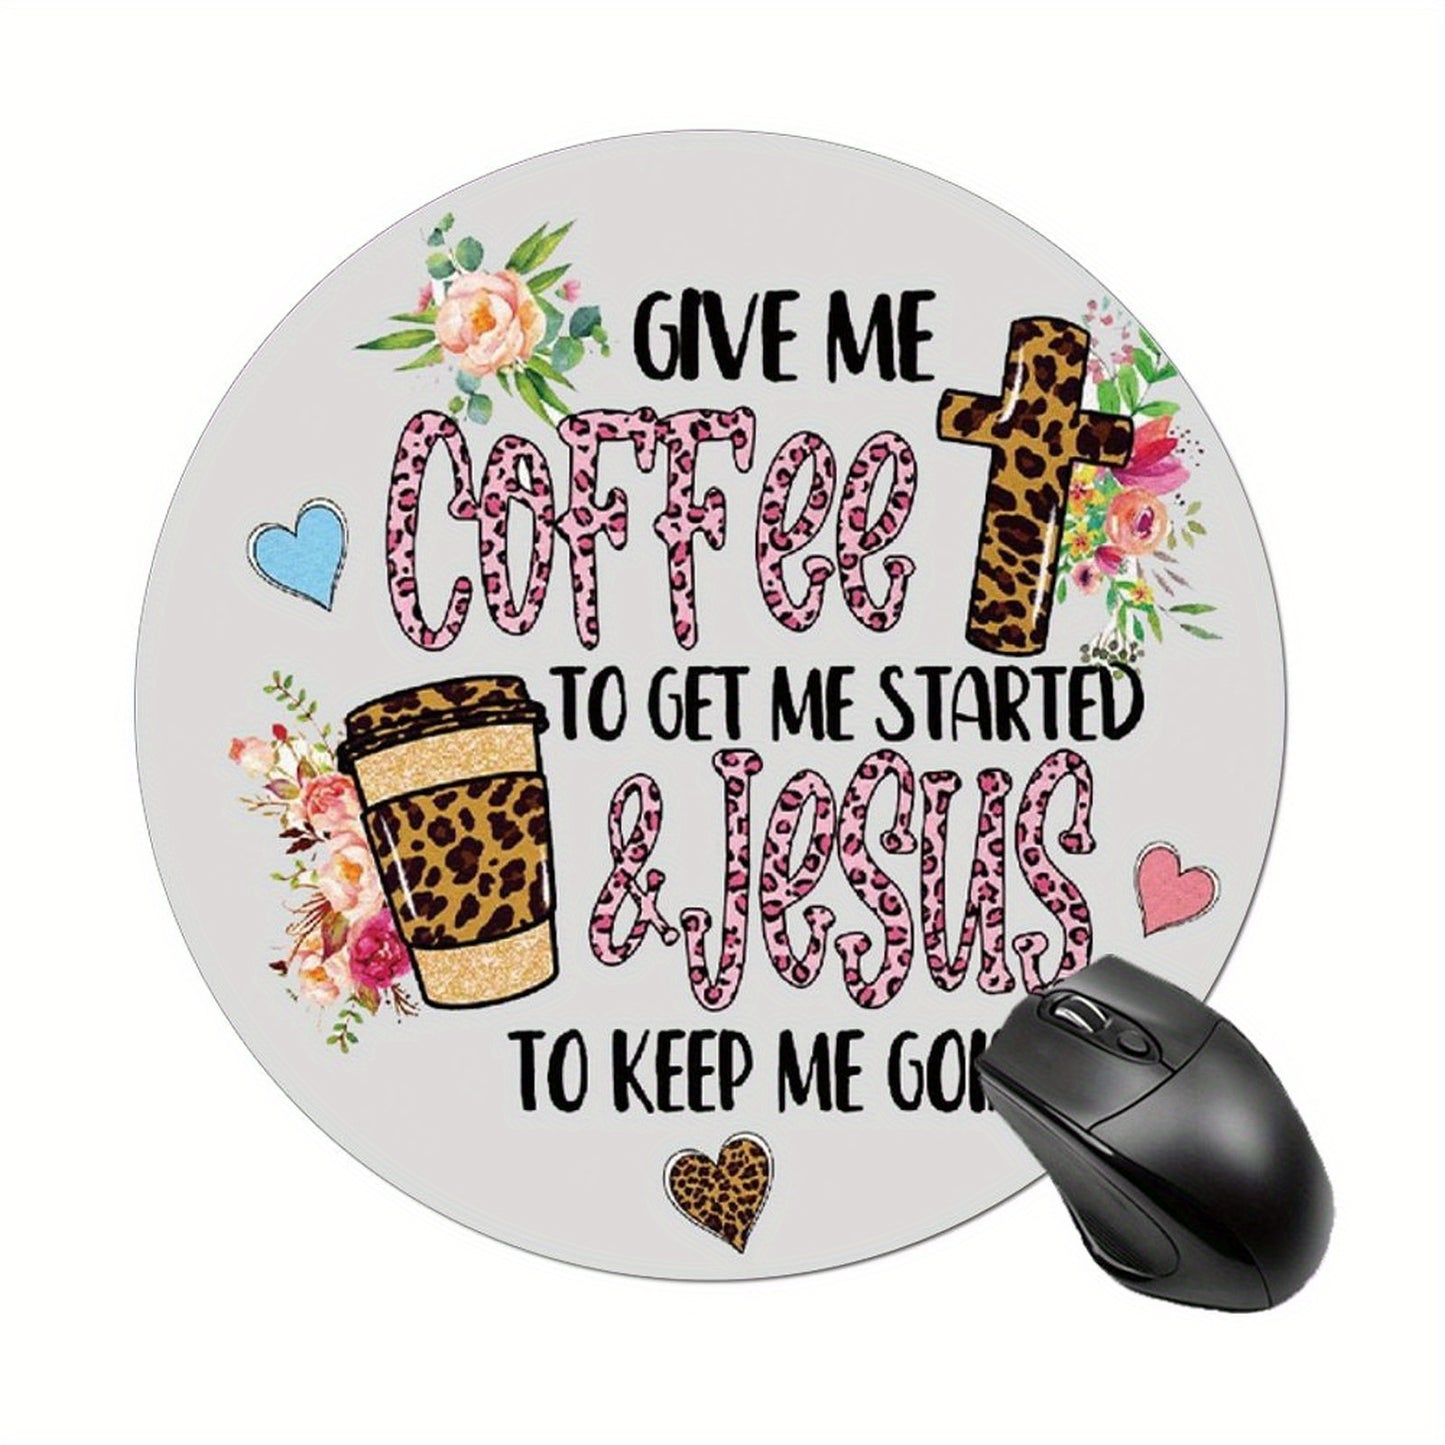 Give Me Coffee To Get Me Started & Jesus To Keep Me Going Christian Computer Mouse Pad claimedbygoddesigns